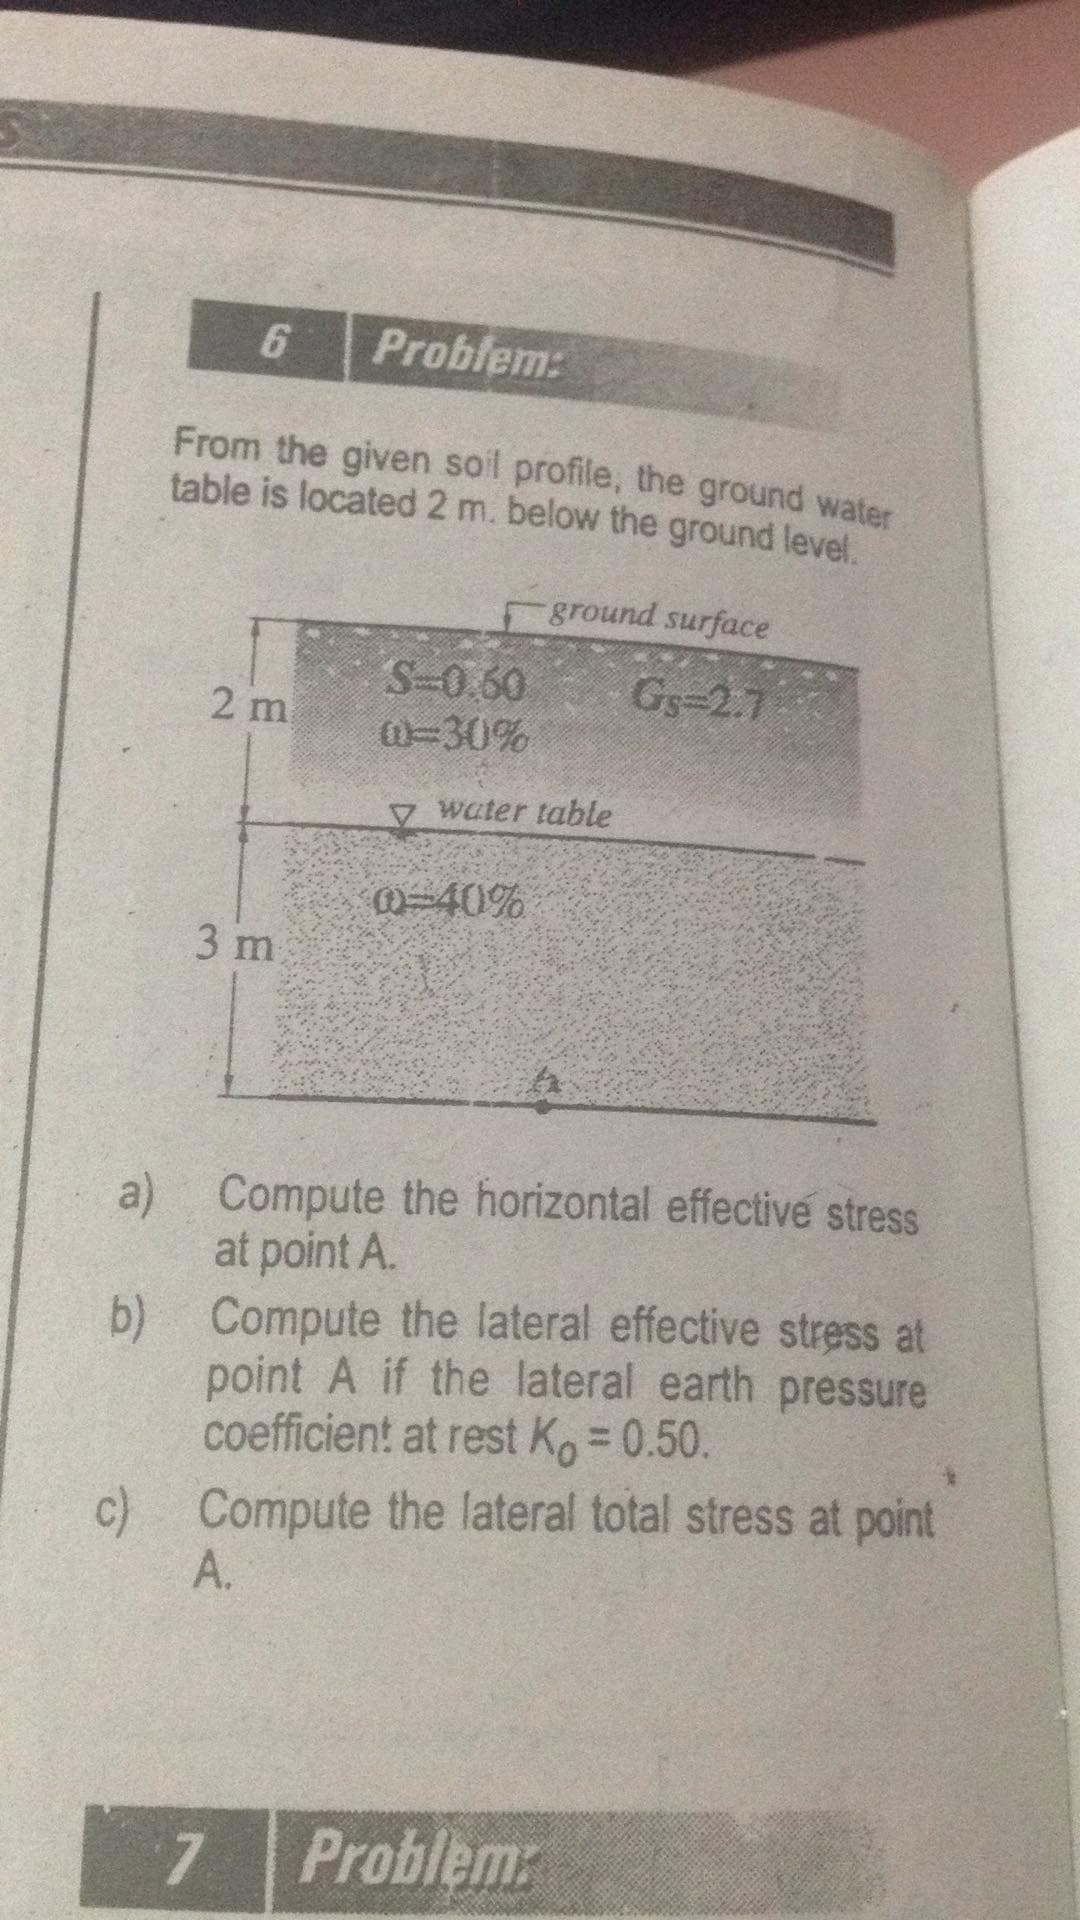 6.
Problem:
From the given soil profile, the ground water
table is located 2 m. below the ground level.
ground surface
S-0.60
W=30%
Gs-2.7
2 m
V water table
@-40%
3 m
a) Compute the horizontal effective stress
at point A.
b) Compute the lateral effective stress at
point A if the lateral earth pressure
coefficient at rest Ko = 0.50.
c) Compute the lateral total stress at point
A.
7.
Problem:
